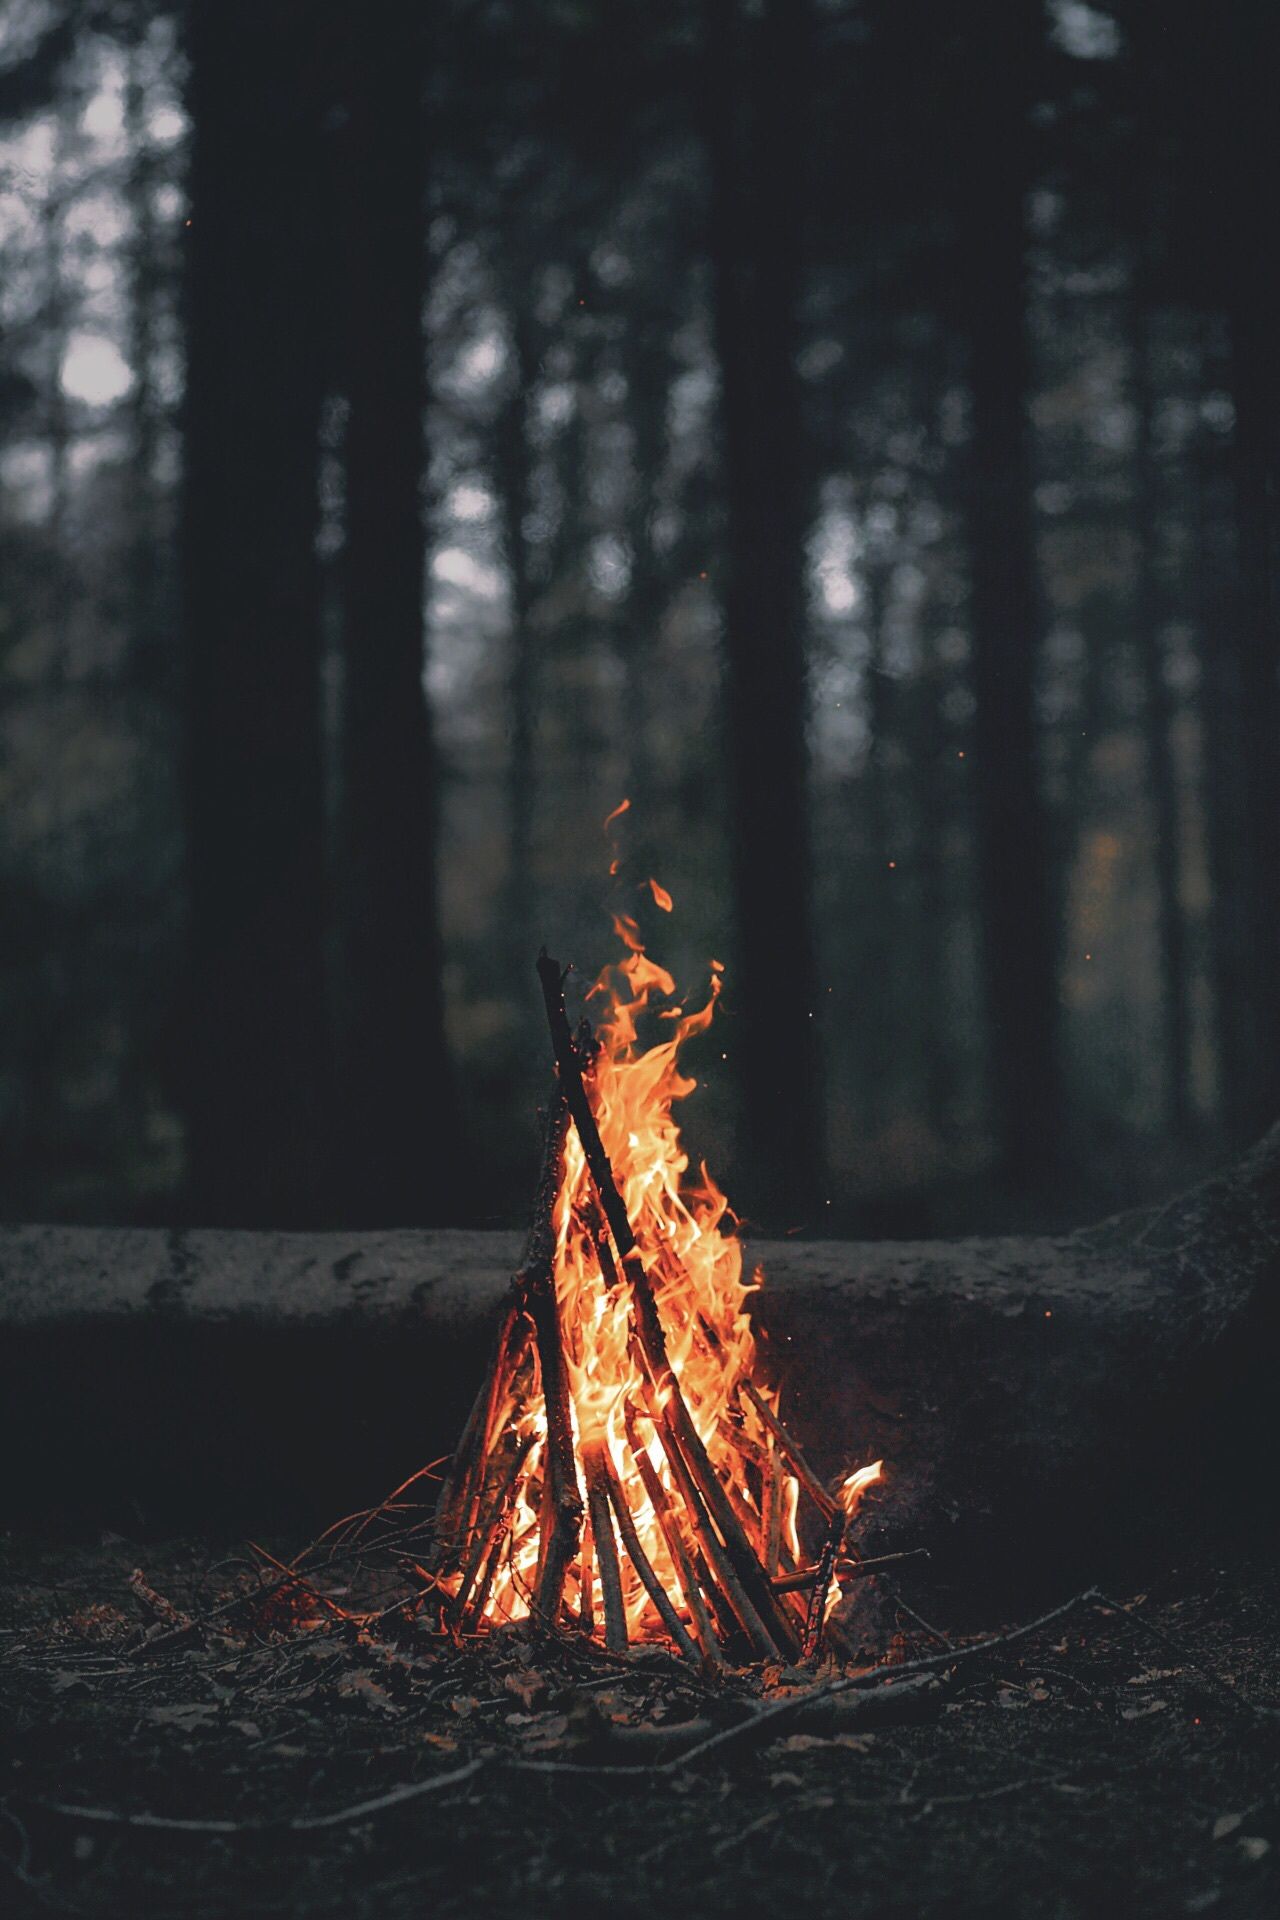 Iphone Fire Wallpapers On Wallpaperdog, Fire Pit Wallpaper